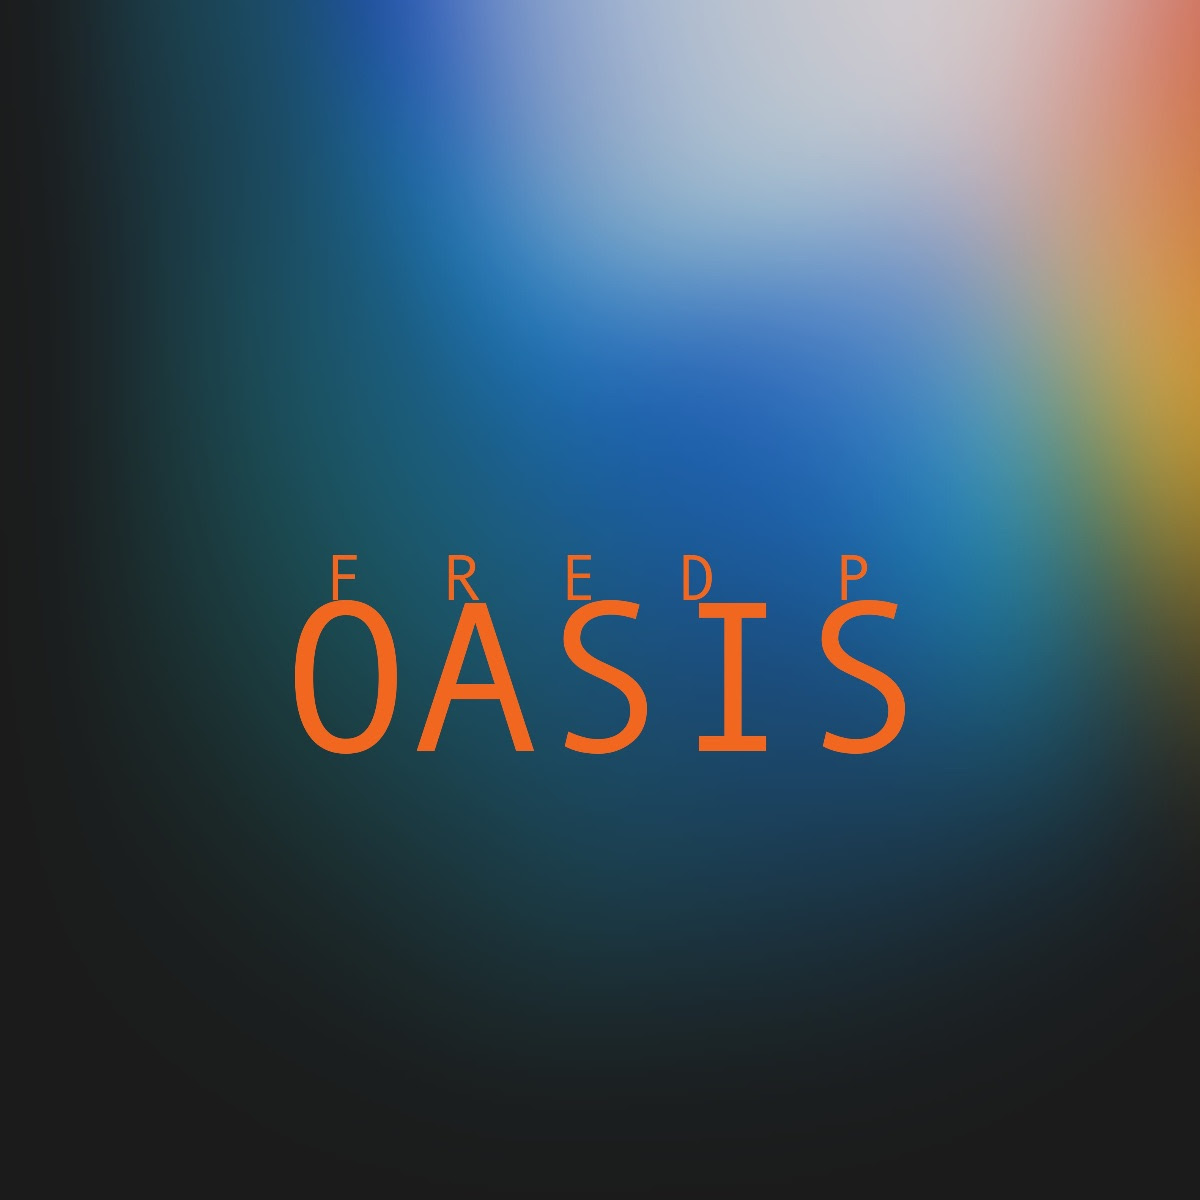 OASIS (2 x 12inch) [PS004] - FRED P. - PRIVATE SOCIETY (US